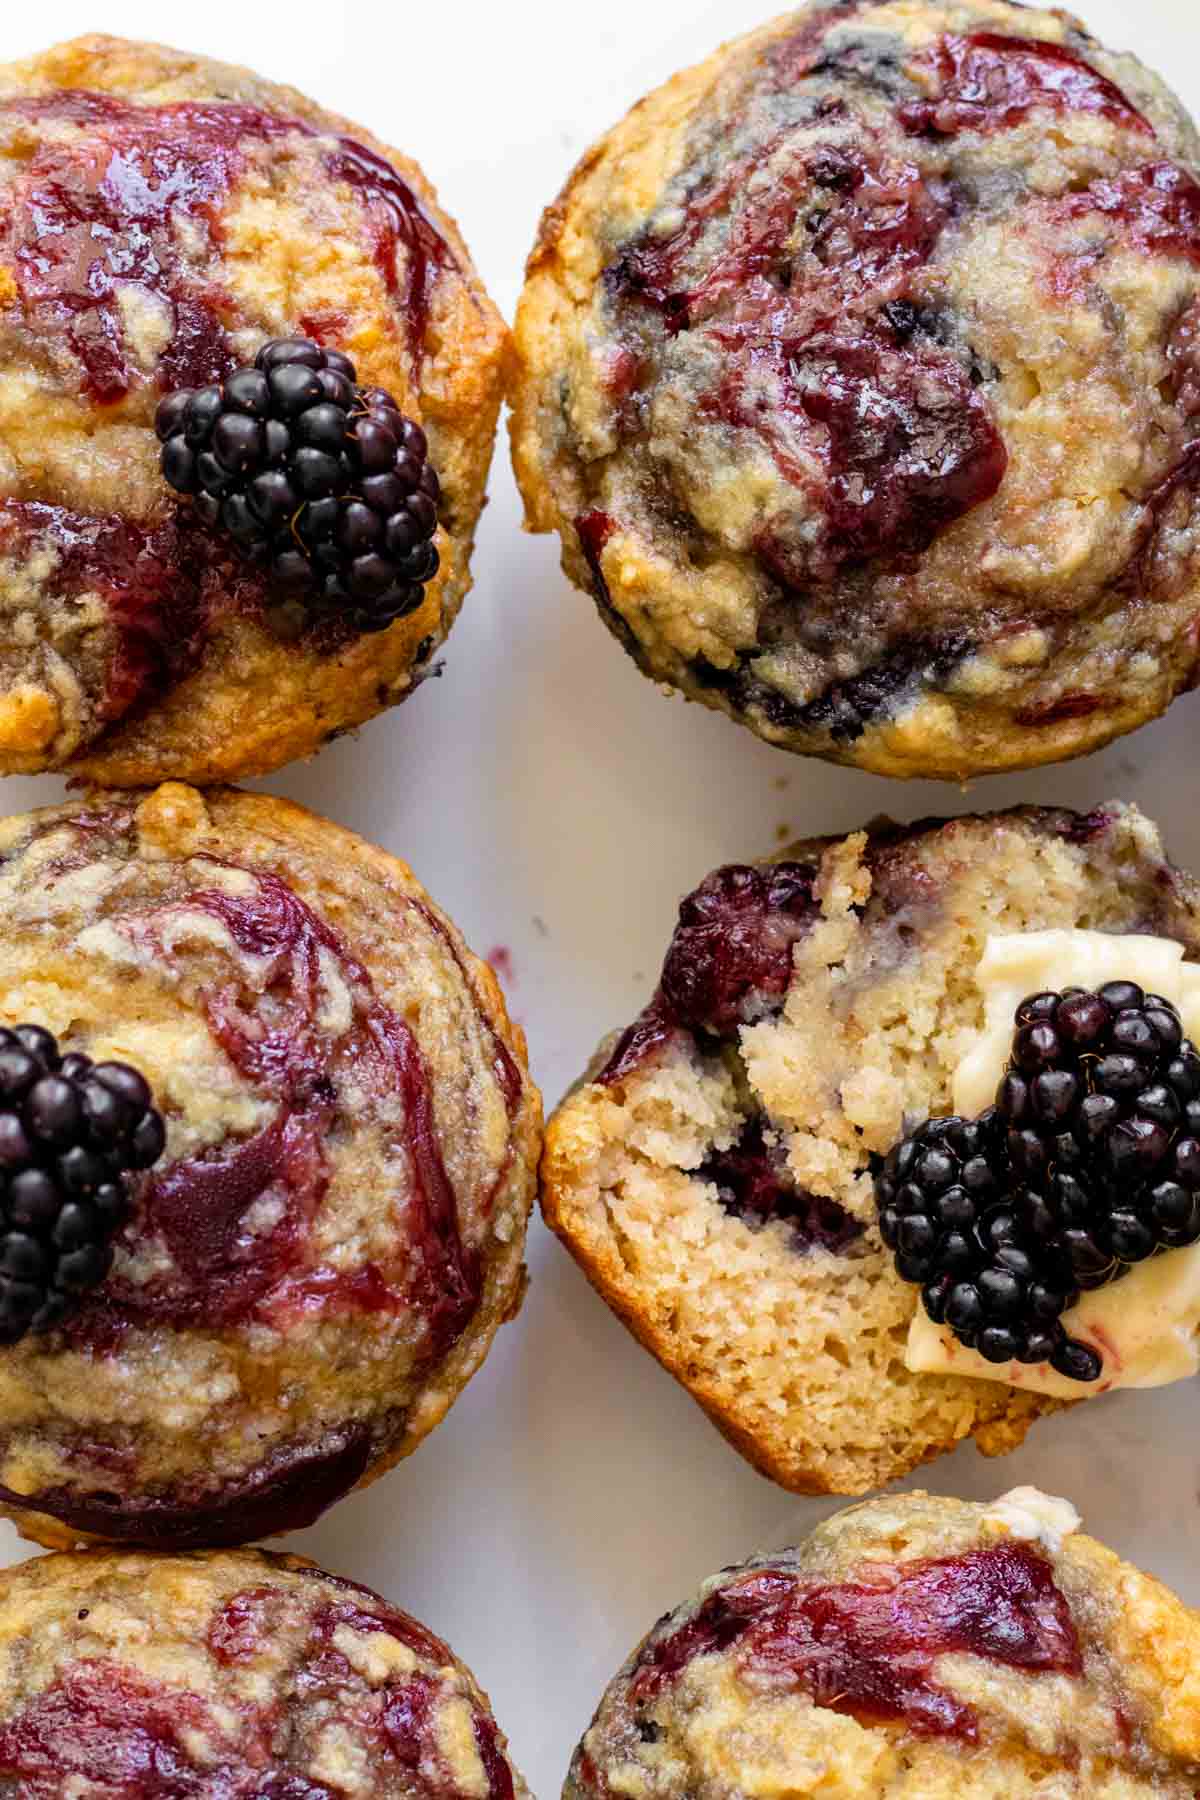 Closeup of 6 muffins with 1 cut in half exposing texture of muffin.